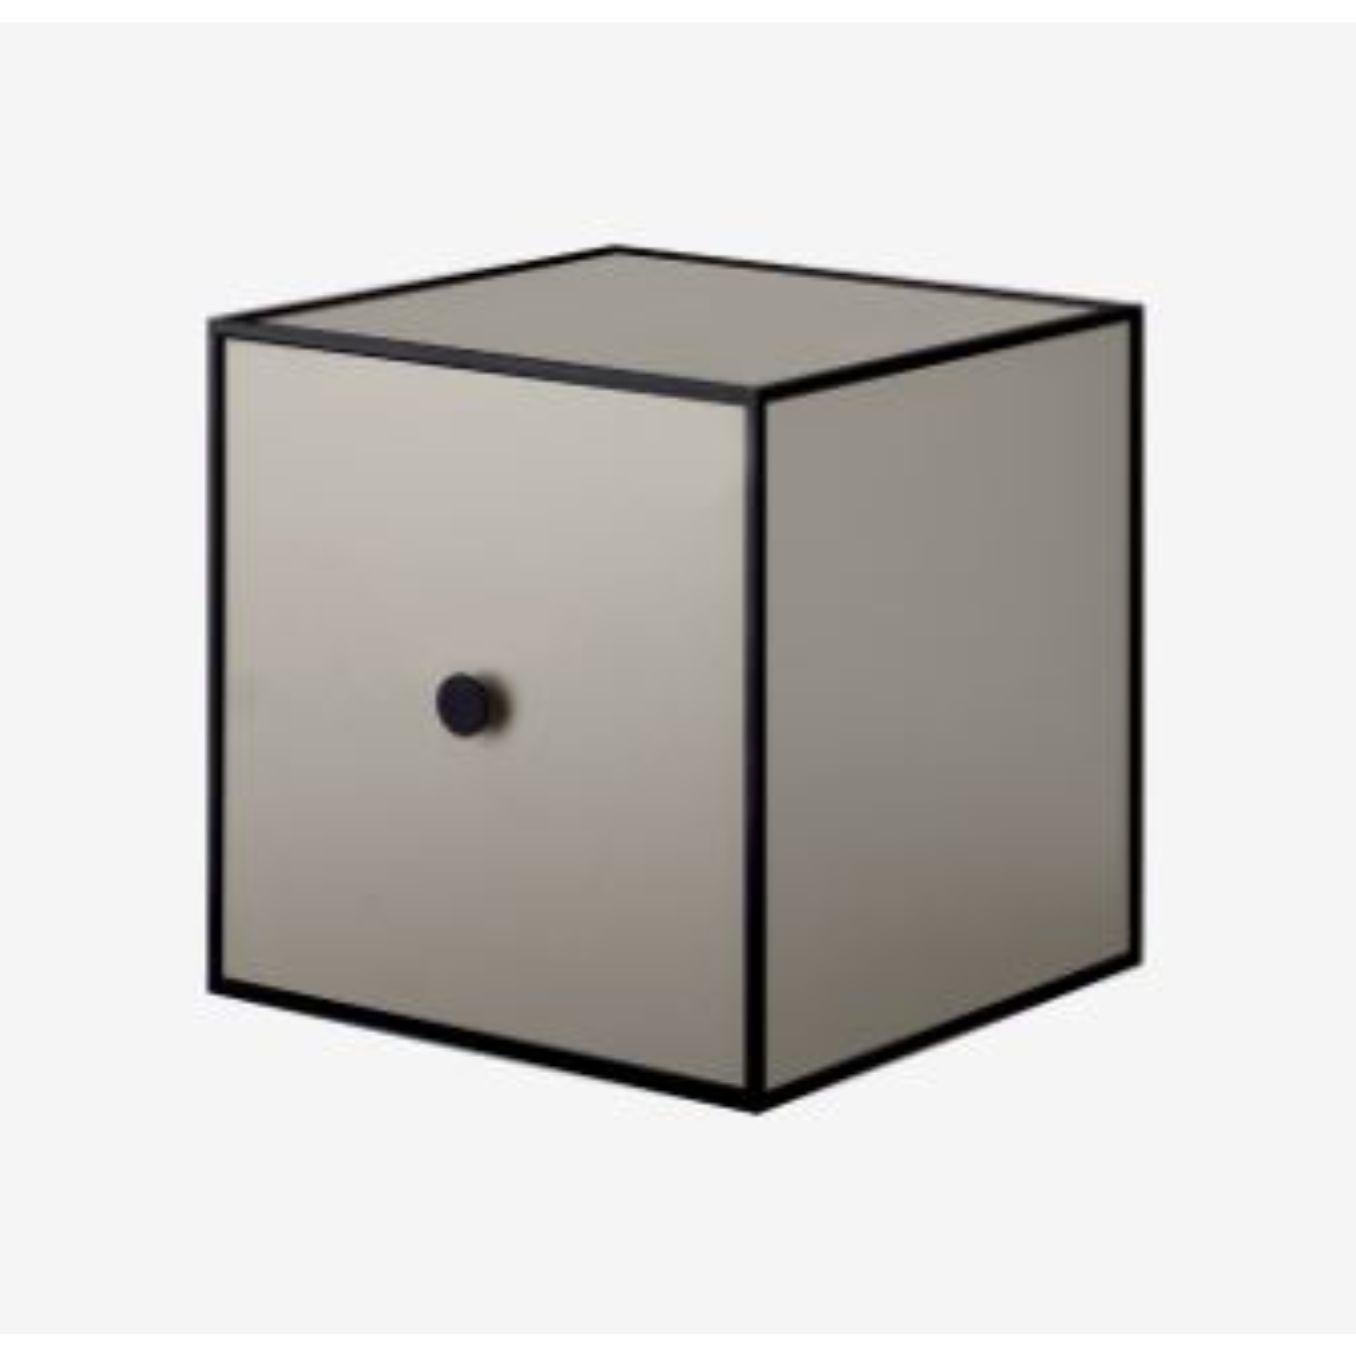 35 sand frame box with door by Lassen
Dimensions: W 35 x D 35 x H 35 cm 
Materials: Finér, Melamin, Melamin, Melamine, Metal, Veneer,
Also available in different colors and dimensions.

By Lassen is a Danish design brand focused on iconic